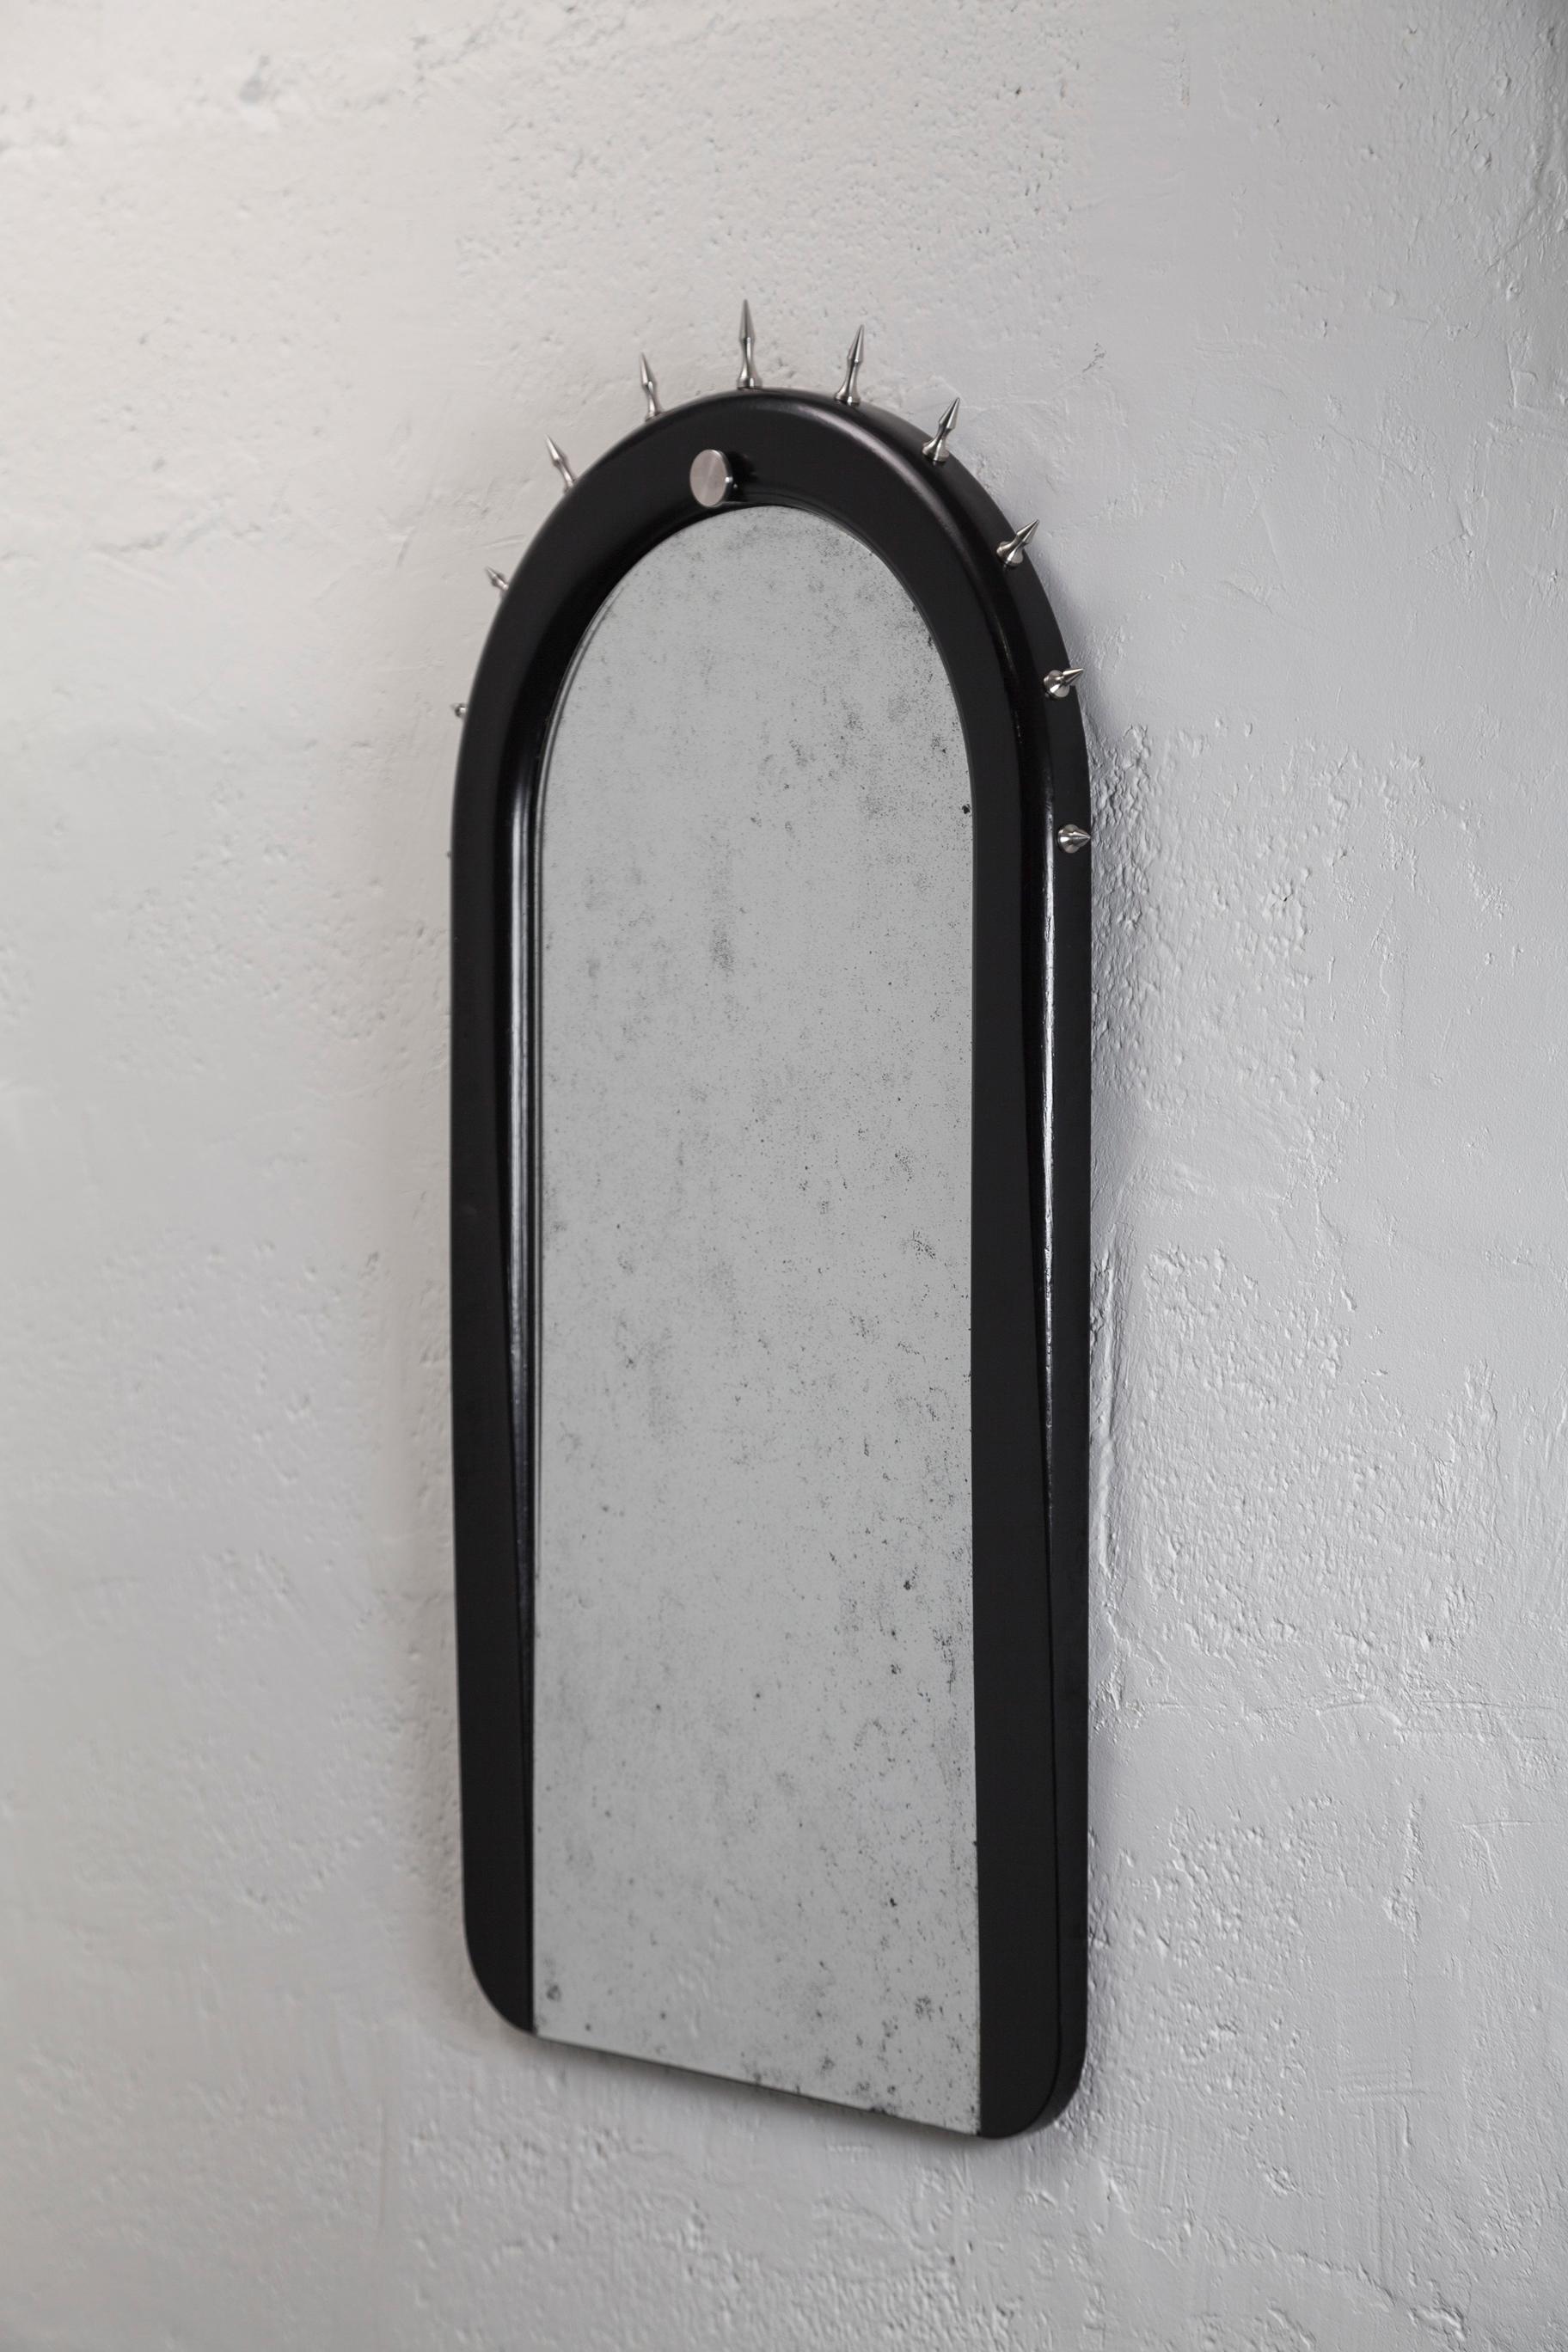 Sitiera_01 Wall Mirror in Solid Wood by ANDEAN, Represented by Tuleste Factory For Sale 11